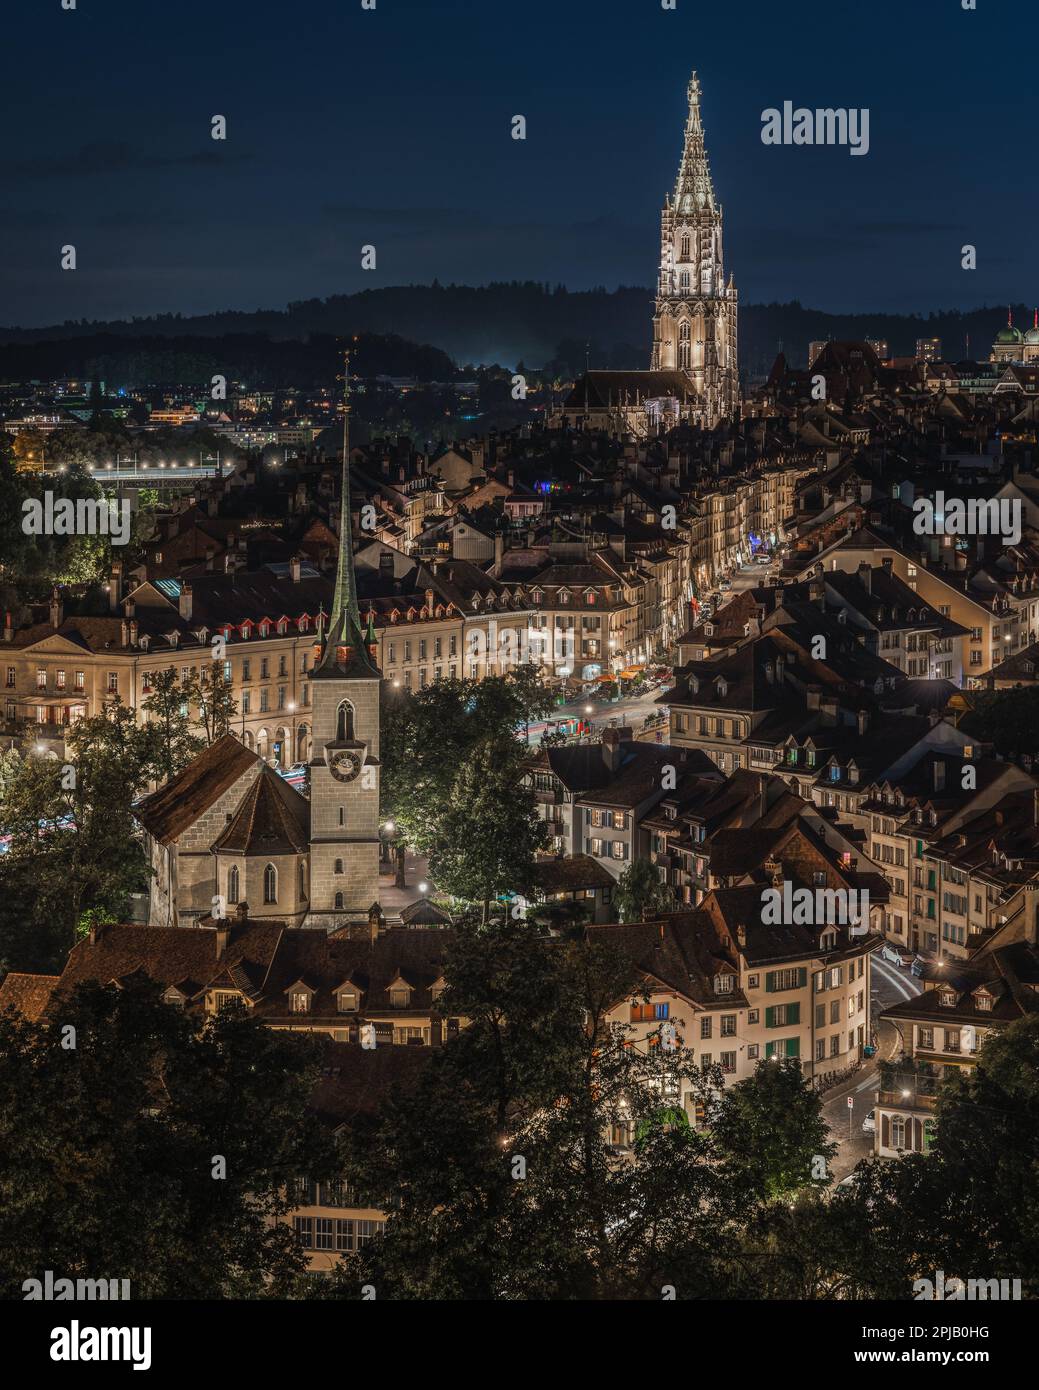 Scenic night panorama of Bern Old Town seen from Rose Garden viewpoint, Switzerland Stock Photo